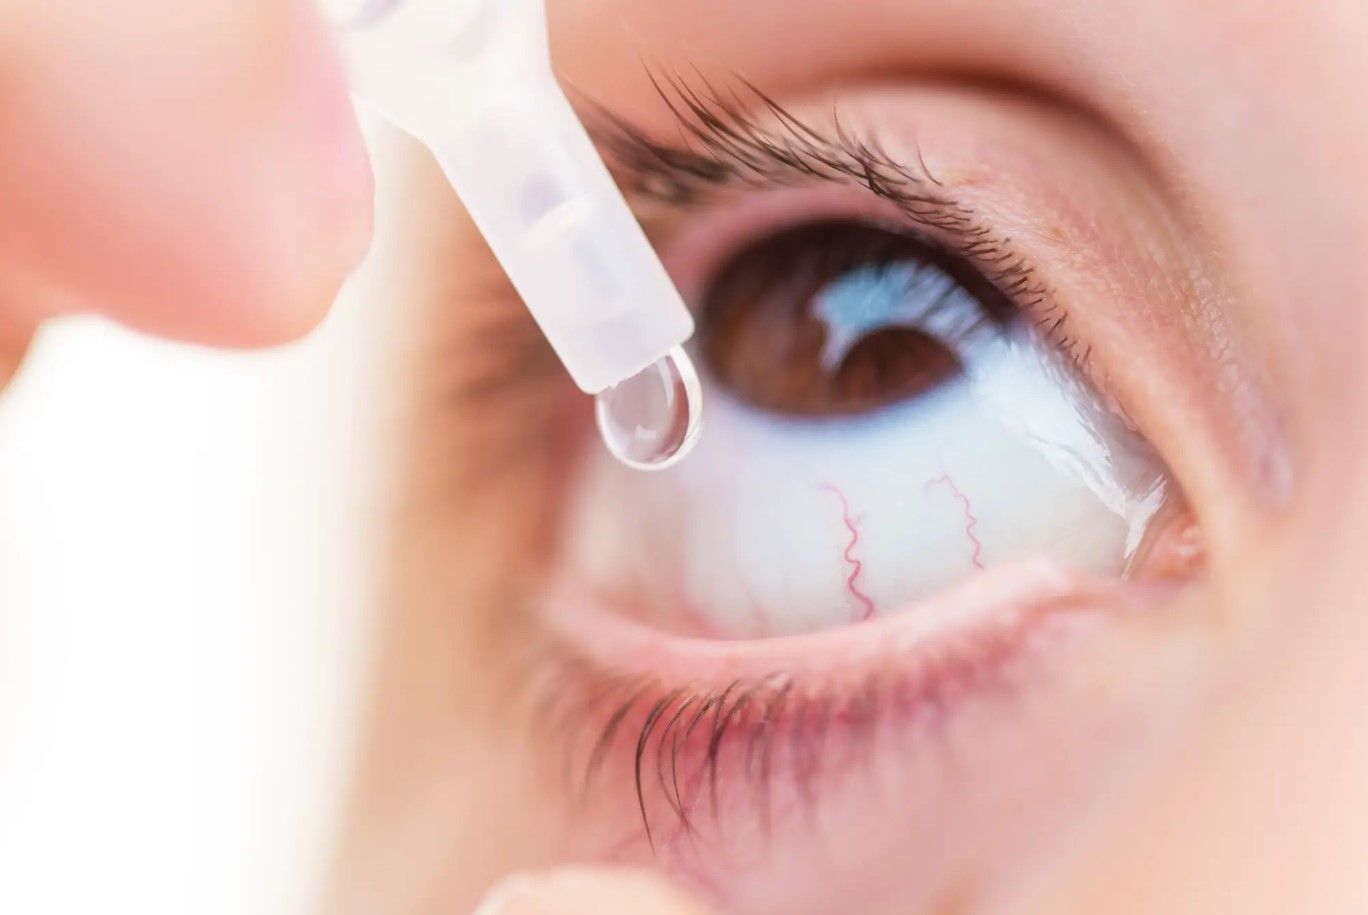 How Long Can I Use an open Eye-Drop Bottle For?